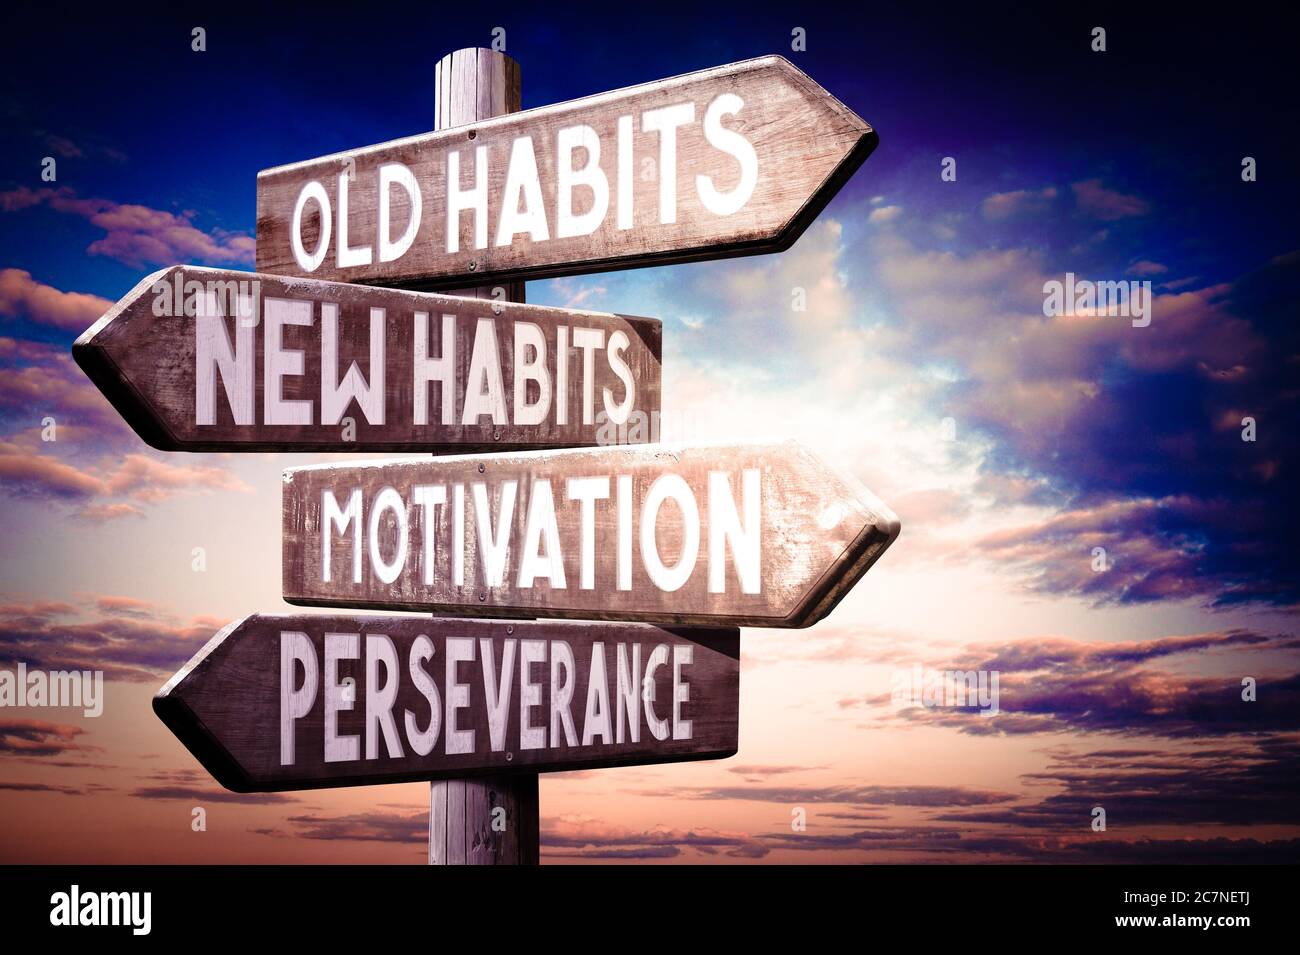 Old habits, new habits, motivation, perseverance - wooden signpost, roadsign with four arrows Stock Photo